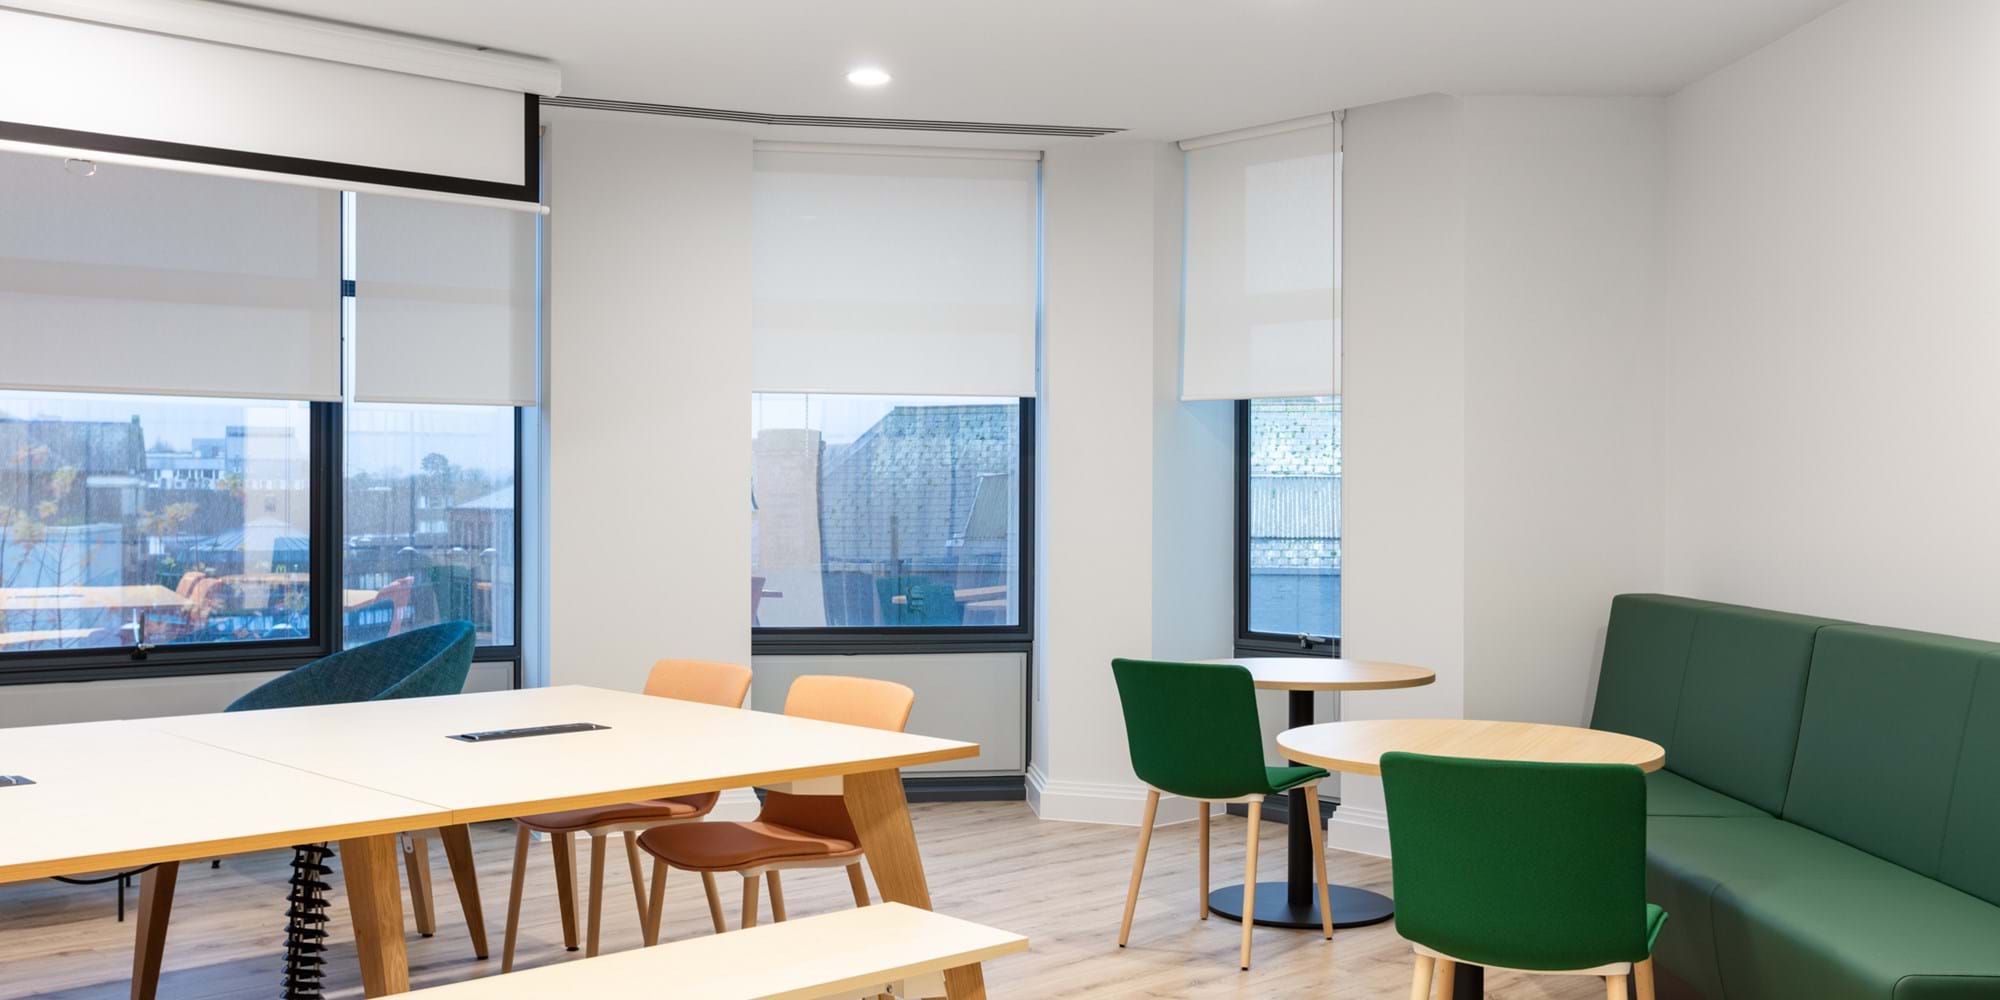 Modus Workspace office design, fit out and refurbishment - Pivot - Guildford - Pivot_Guildford_161220-61.jpg